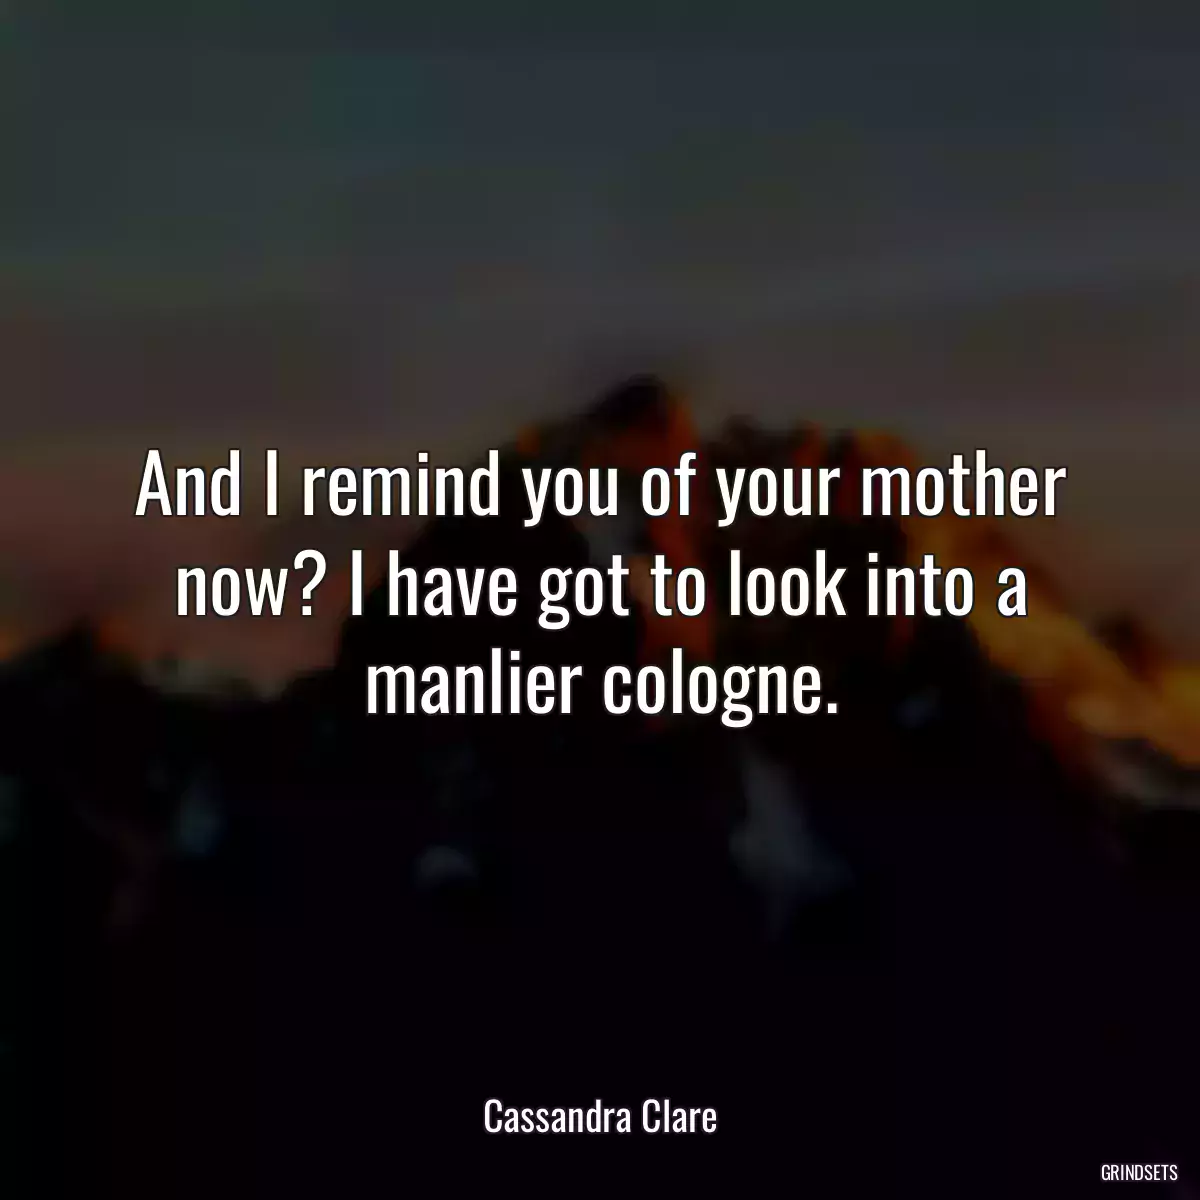 And I remind you of your mother now? I have got to look into a manlier cologne.